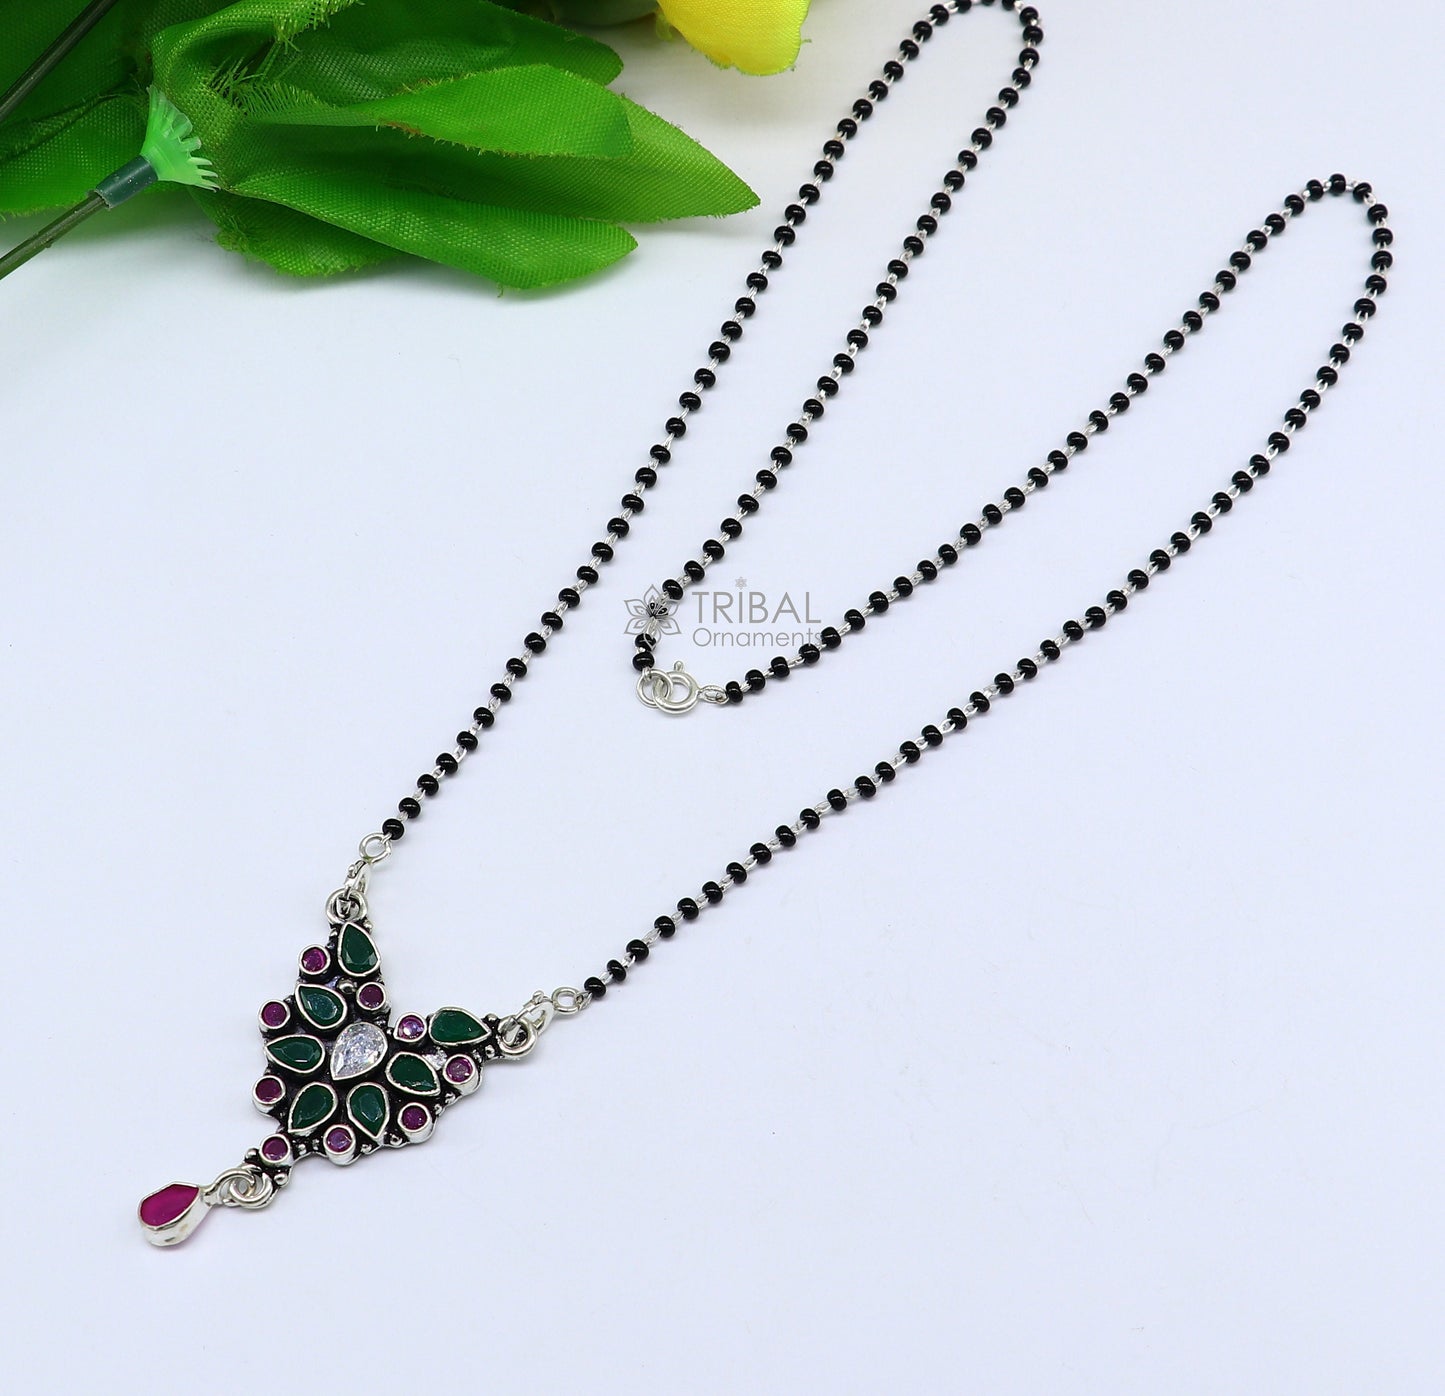 925 sterling silver handmade delicate black beaded chain and fabulous cut stone pendant, amazing brides mangalsutra necklace from india ms45 - TRIBAL ORNAMENTS